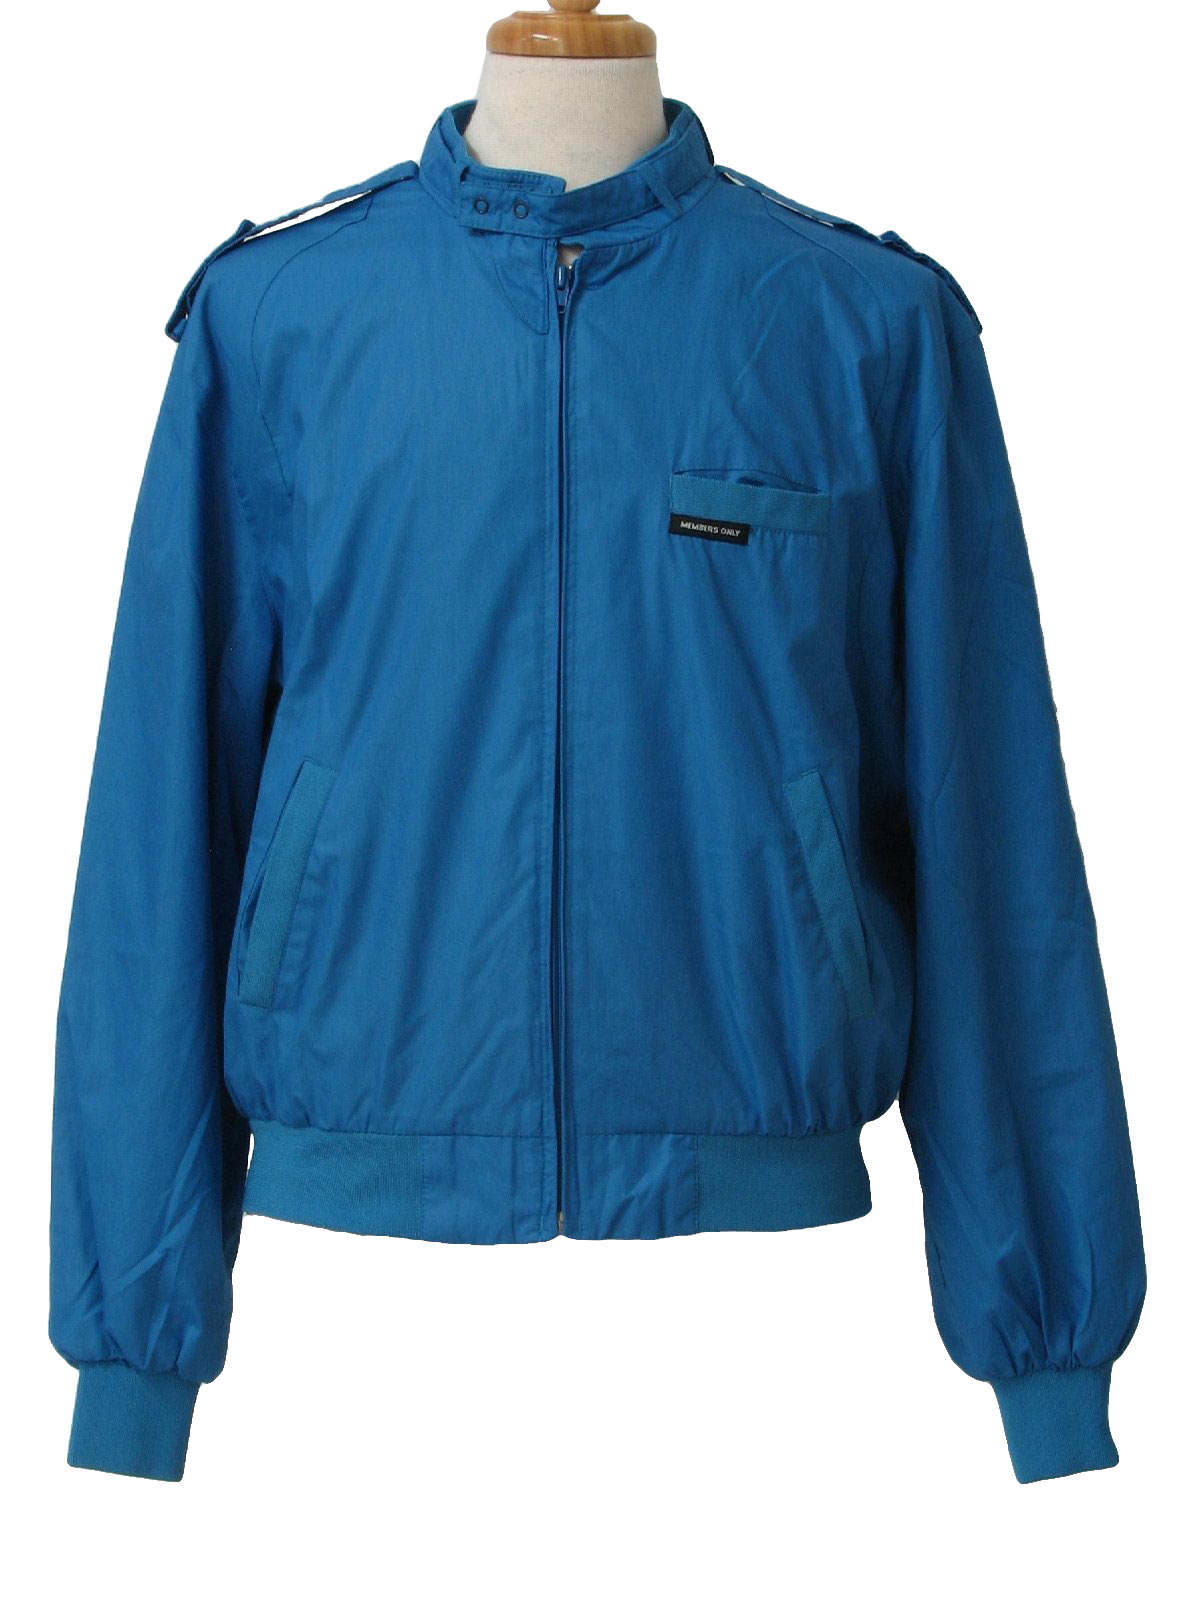 Vintage 1980's Jacket: 80s -Members Only- Mens vibrant blue cotton and ...